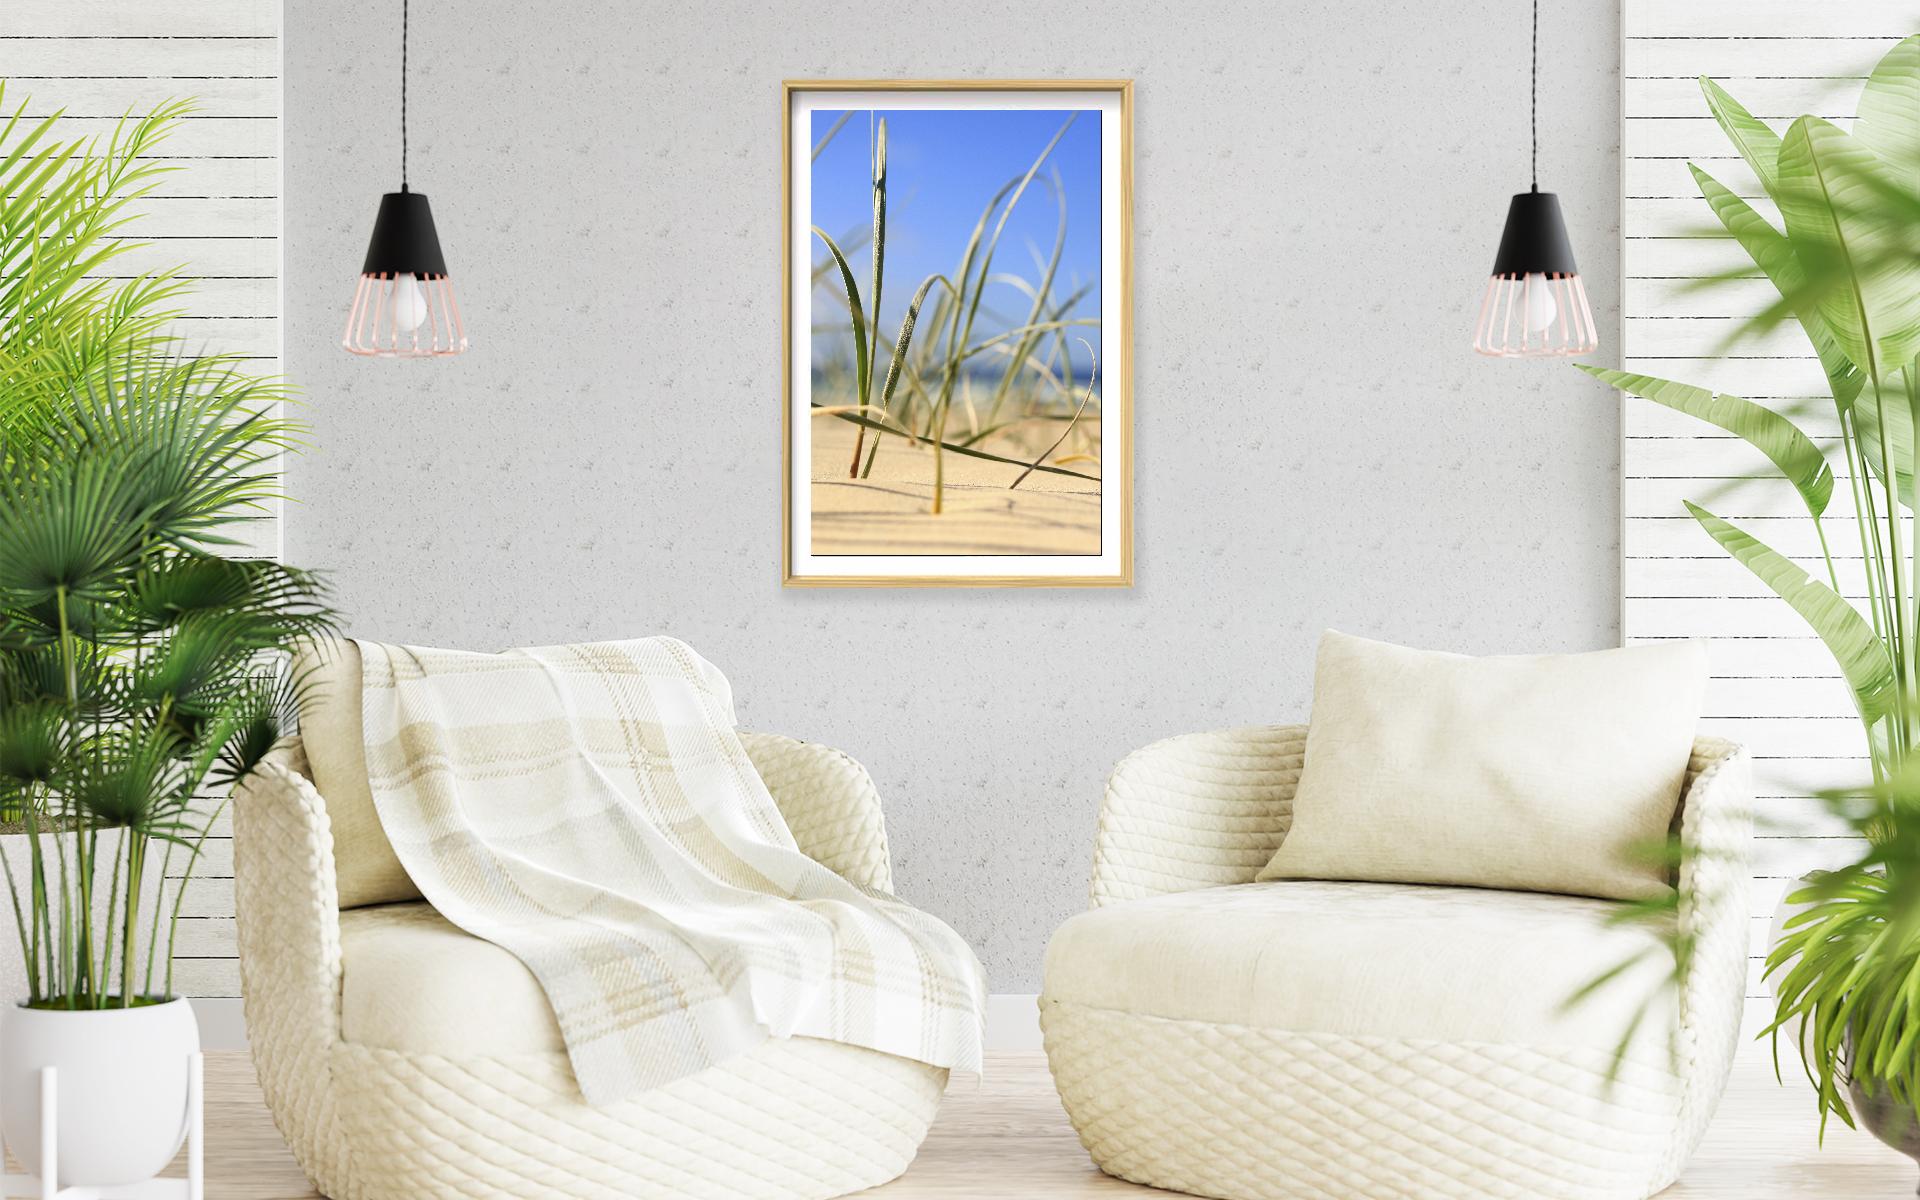 Image 9 - Seagrass-frame-3